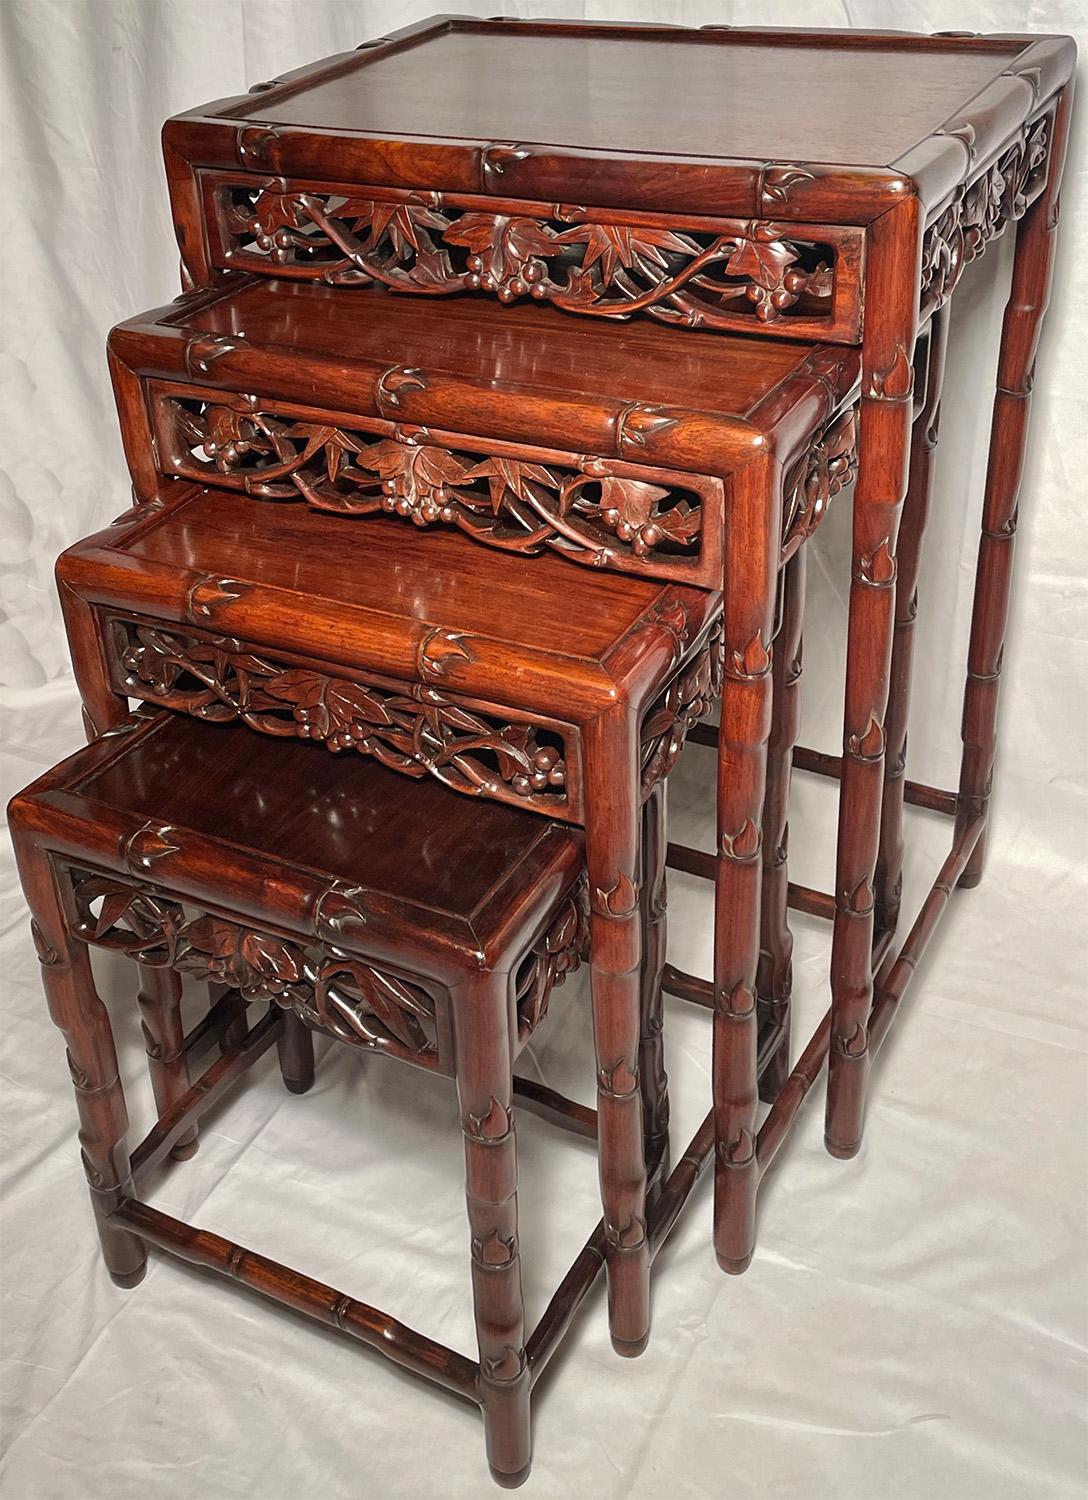 Set of 4 Antique Chinese Teakwood Nest of Tables, Circa 1890 For Sale 1